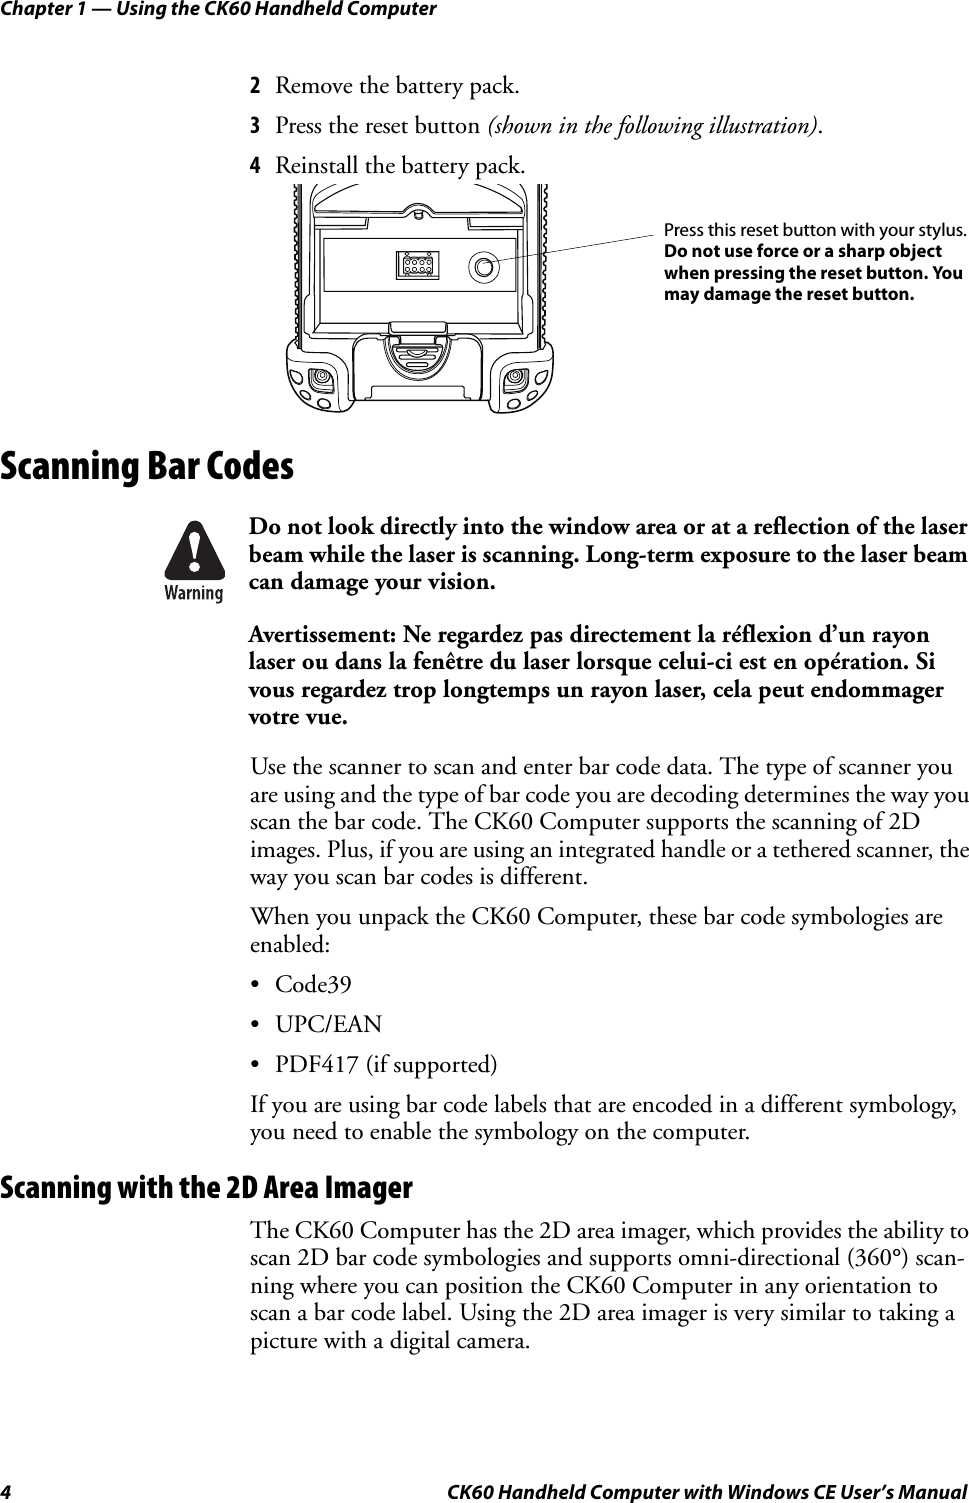 Chapter 1 — Using the CK60 Handheld Computer4 CK60 Handheld Computer with Windows CE User’s Manual2Remove the battery pack.3Press the reset button (shown in the following illustration).4Reinstall the battery pack.Scanning Bar CodesUse the scanner to scan and enter bar code data. The type of scanner you are using and the type of bar code you are decoding determines the way you scan the bar code. The CK60 Computer supports the scanning of 2D images. Plus, if you are using an integrated handle or a tethered scanner, the way you scan bar codes is different.When you unpack the CK60 Computer, these bar code symbologies are enabled:•Code39•UPC/EAN• PDF417 (if supported)If you are using bar code labels that are encoded in a different symbology, you need to enable the symbology on the computer.Scanning with the 2D Area ImagerThe CK60 Computer has the 2D area imager, which provides the ability to scan 2D bar code symbologies and supports omni-directional (360°) scan-ning where you can position the CK60 Computer in any orientation to scan a bar code label. Using the 2D area imager is very similar to taking a picture with a digital camera.Do not look directly into the window area or at a reflection of the laser beam while the laser is scanning. Long-term exposure to the laser beam can damage your vision.Avertissement: Ne regardez pas directement la réflexion d’un rayon laser ou dans la fenêtre du laser lorsque celui-ci est en opération. Si vous regardez trop longtemps un rayon laser, cela peut endommager votre vue. Press this reset button with your stylus.Do not use force or a sharp object when pressing the reset button. Youmay damage the reset button.